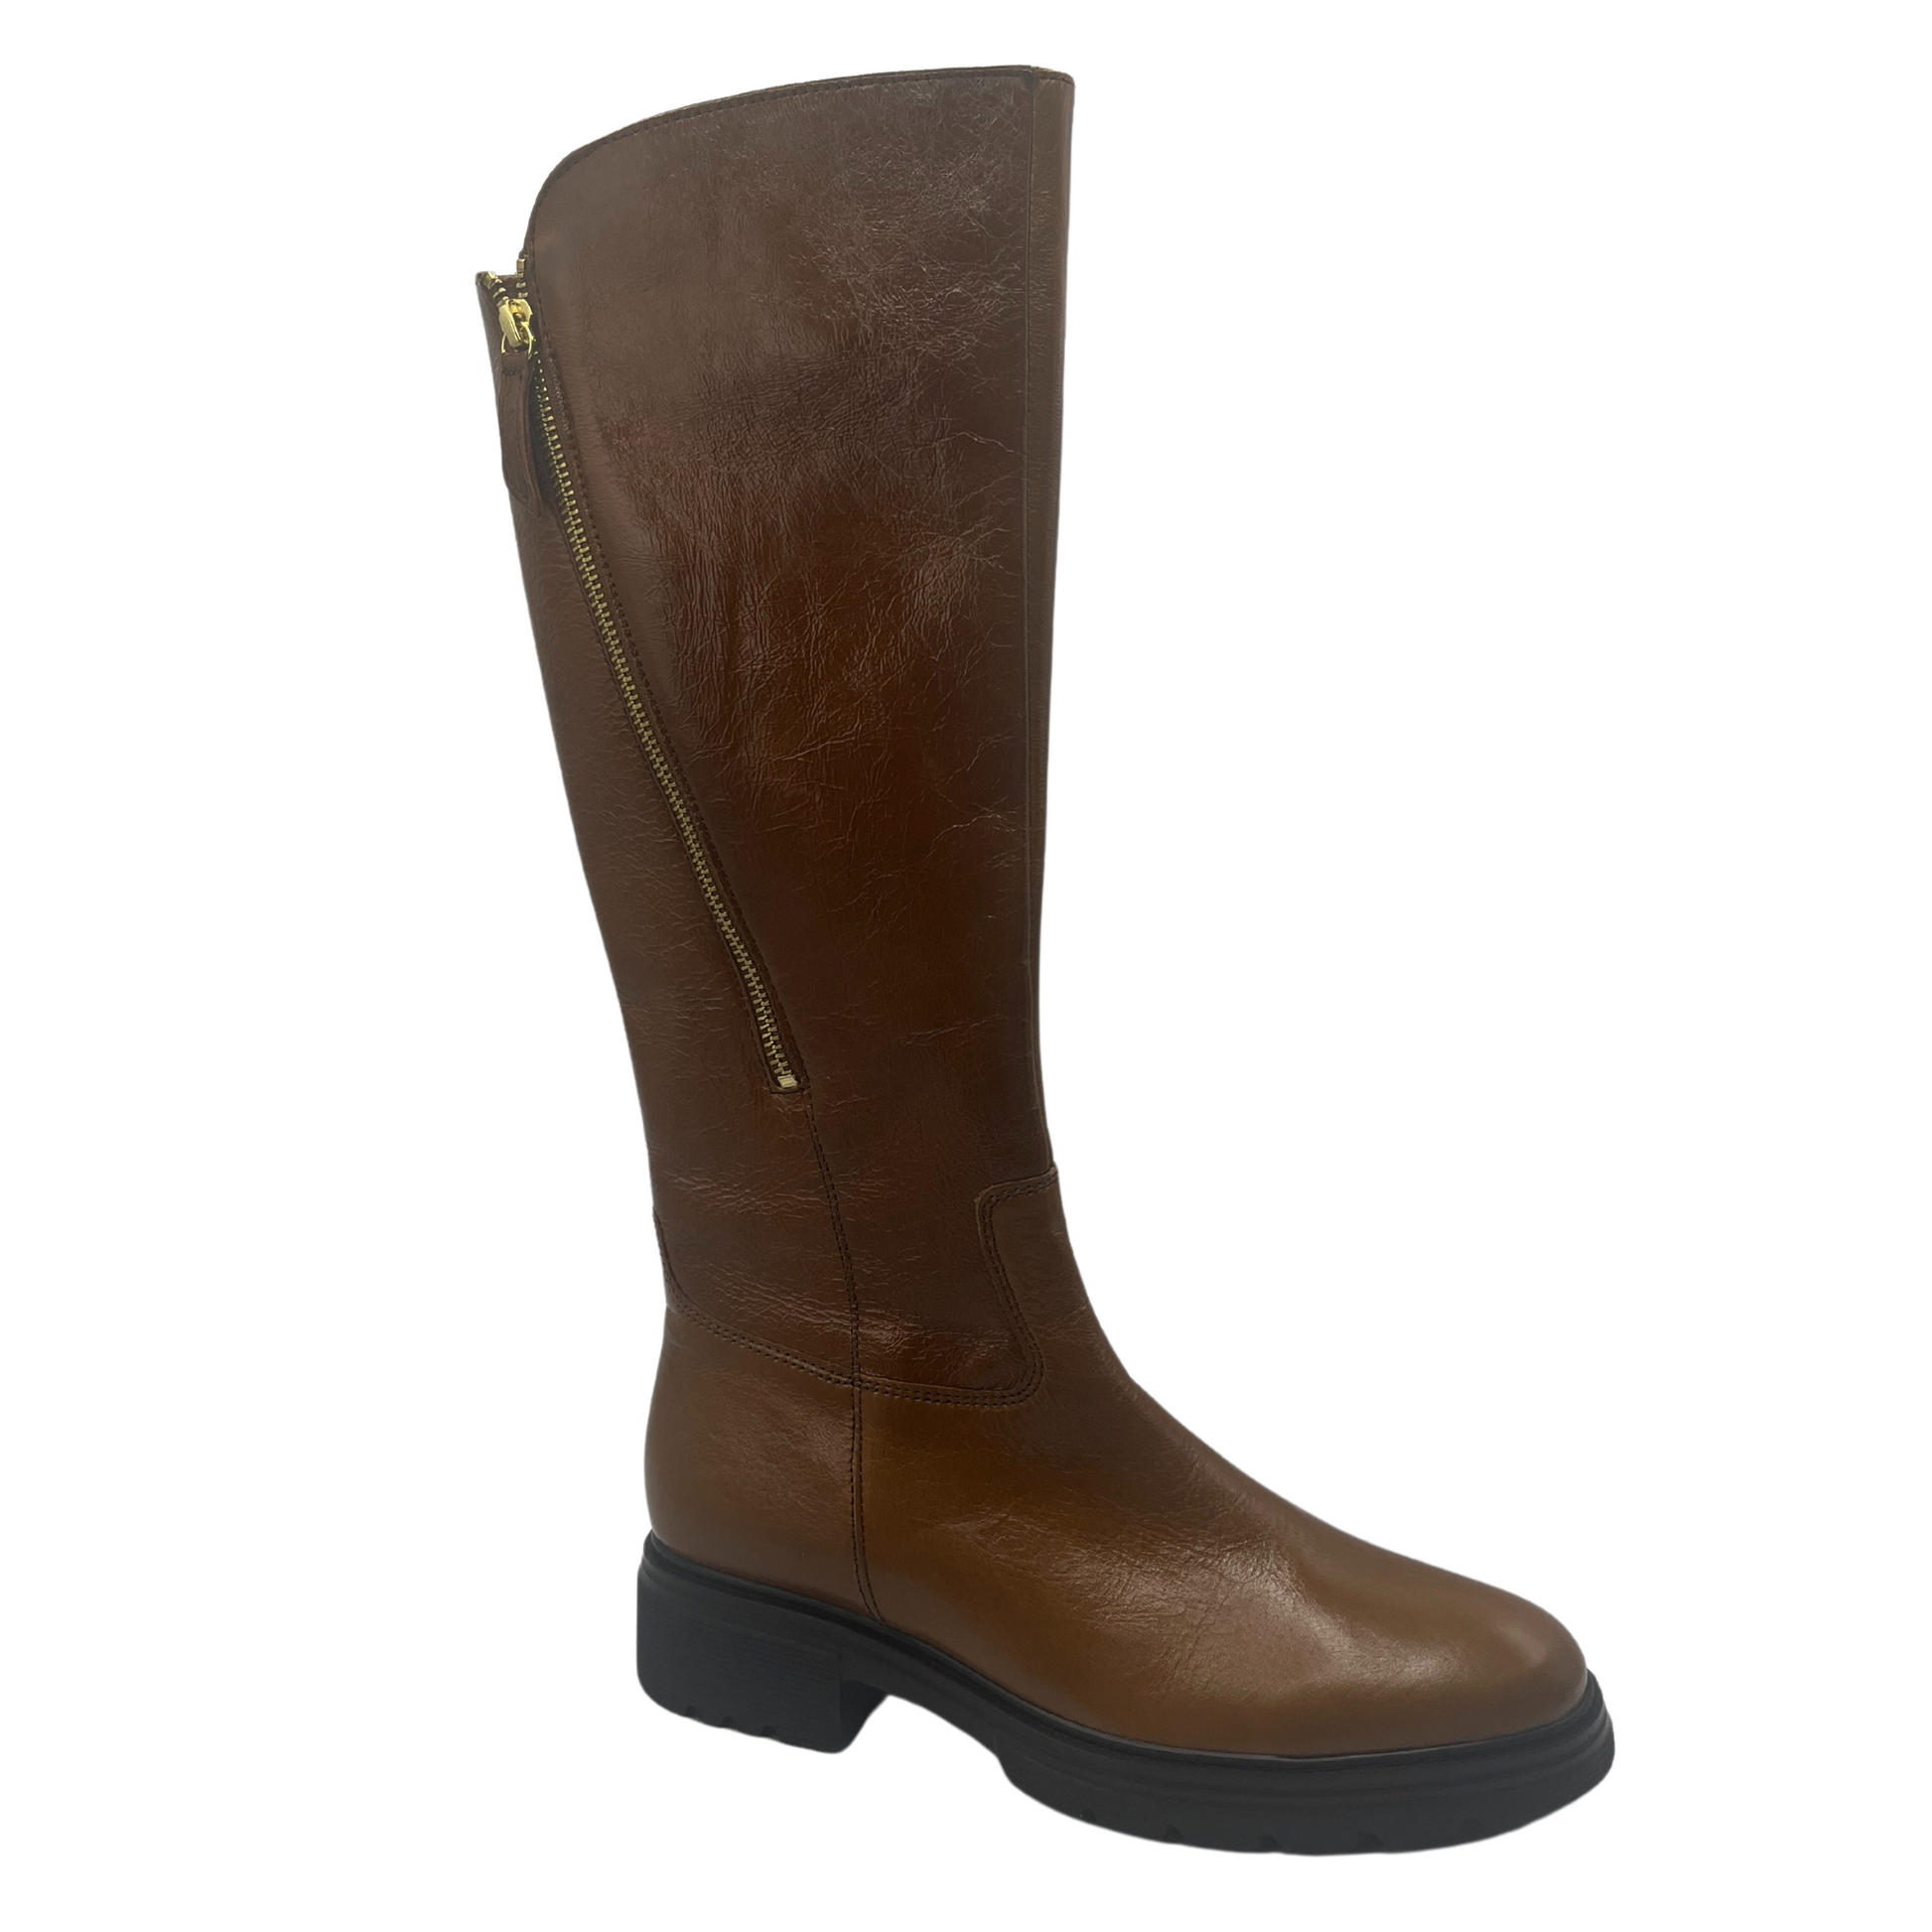 45 degree angled view of brown leather riding boot with angled side zipper closure and black rubber outsole